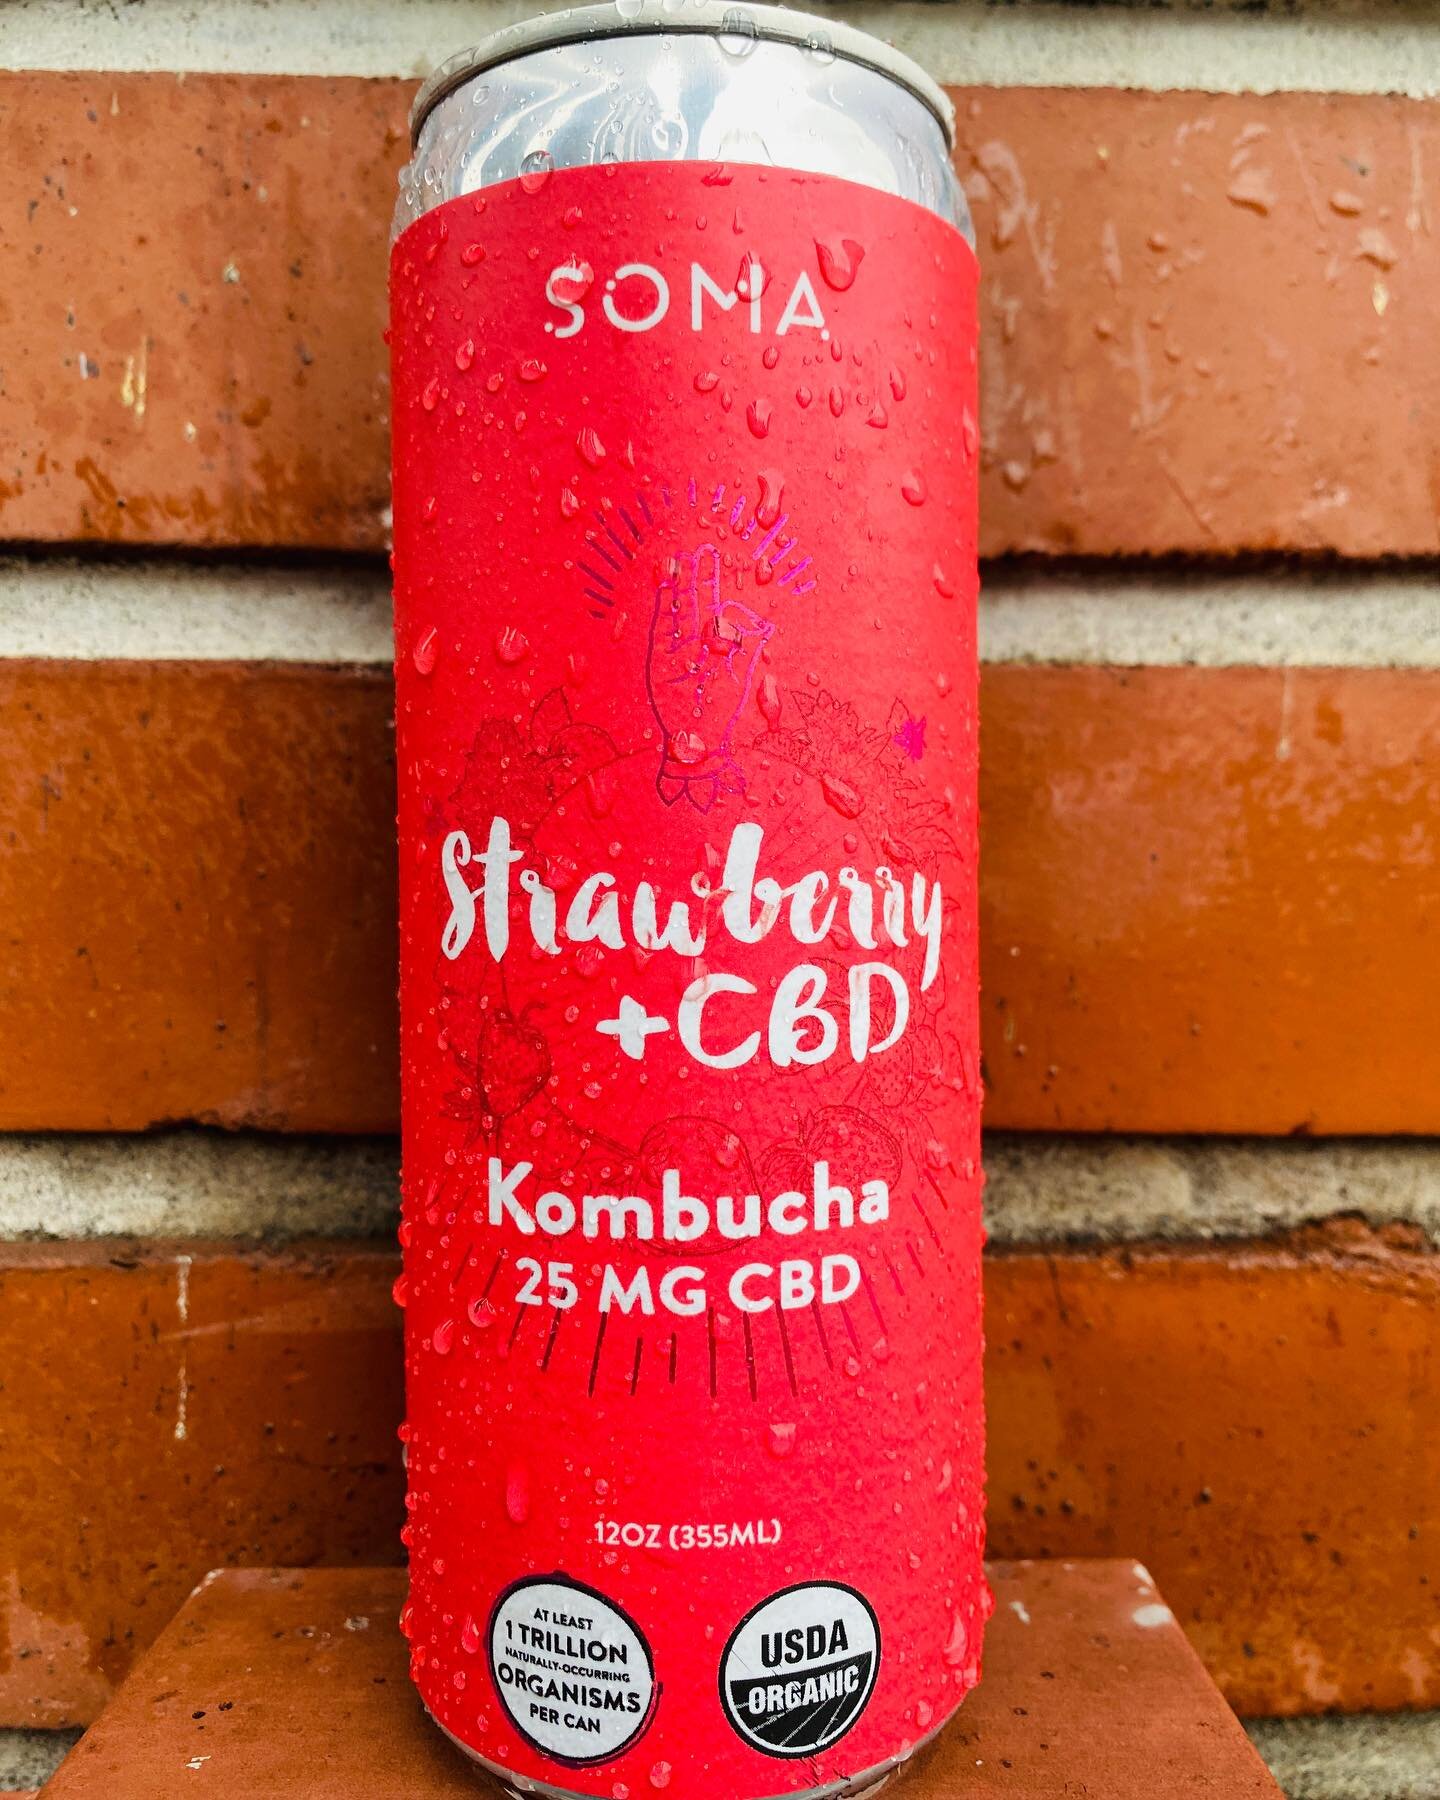 Strawberry CBD is a Kombucha comprised of organic black tea cold-brewed in pure volcanic glacier water with organic evaporated cane juice (needed for fermentation) that is then blended with organic strawberry juice and SOMA&rsquo;s hand-crafted CBD T